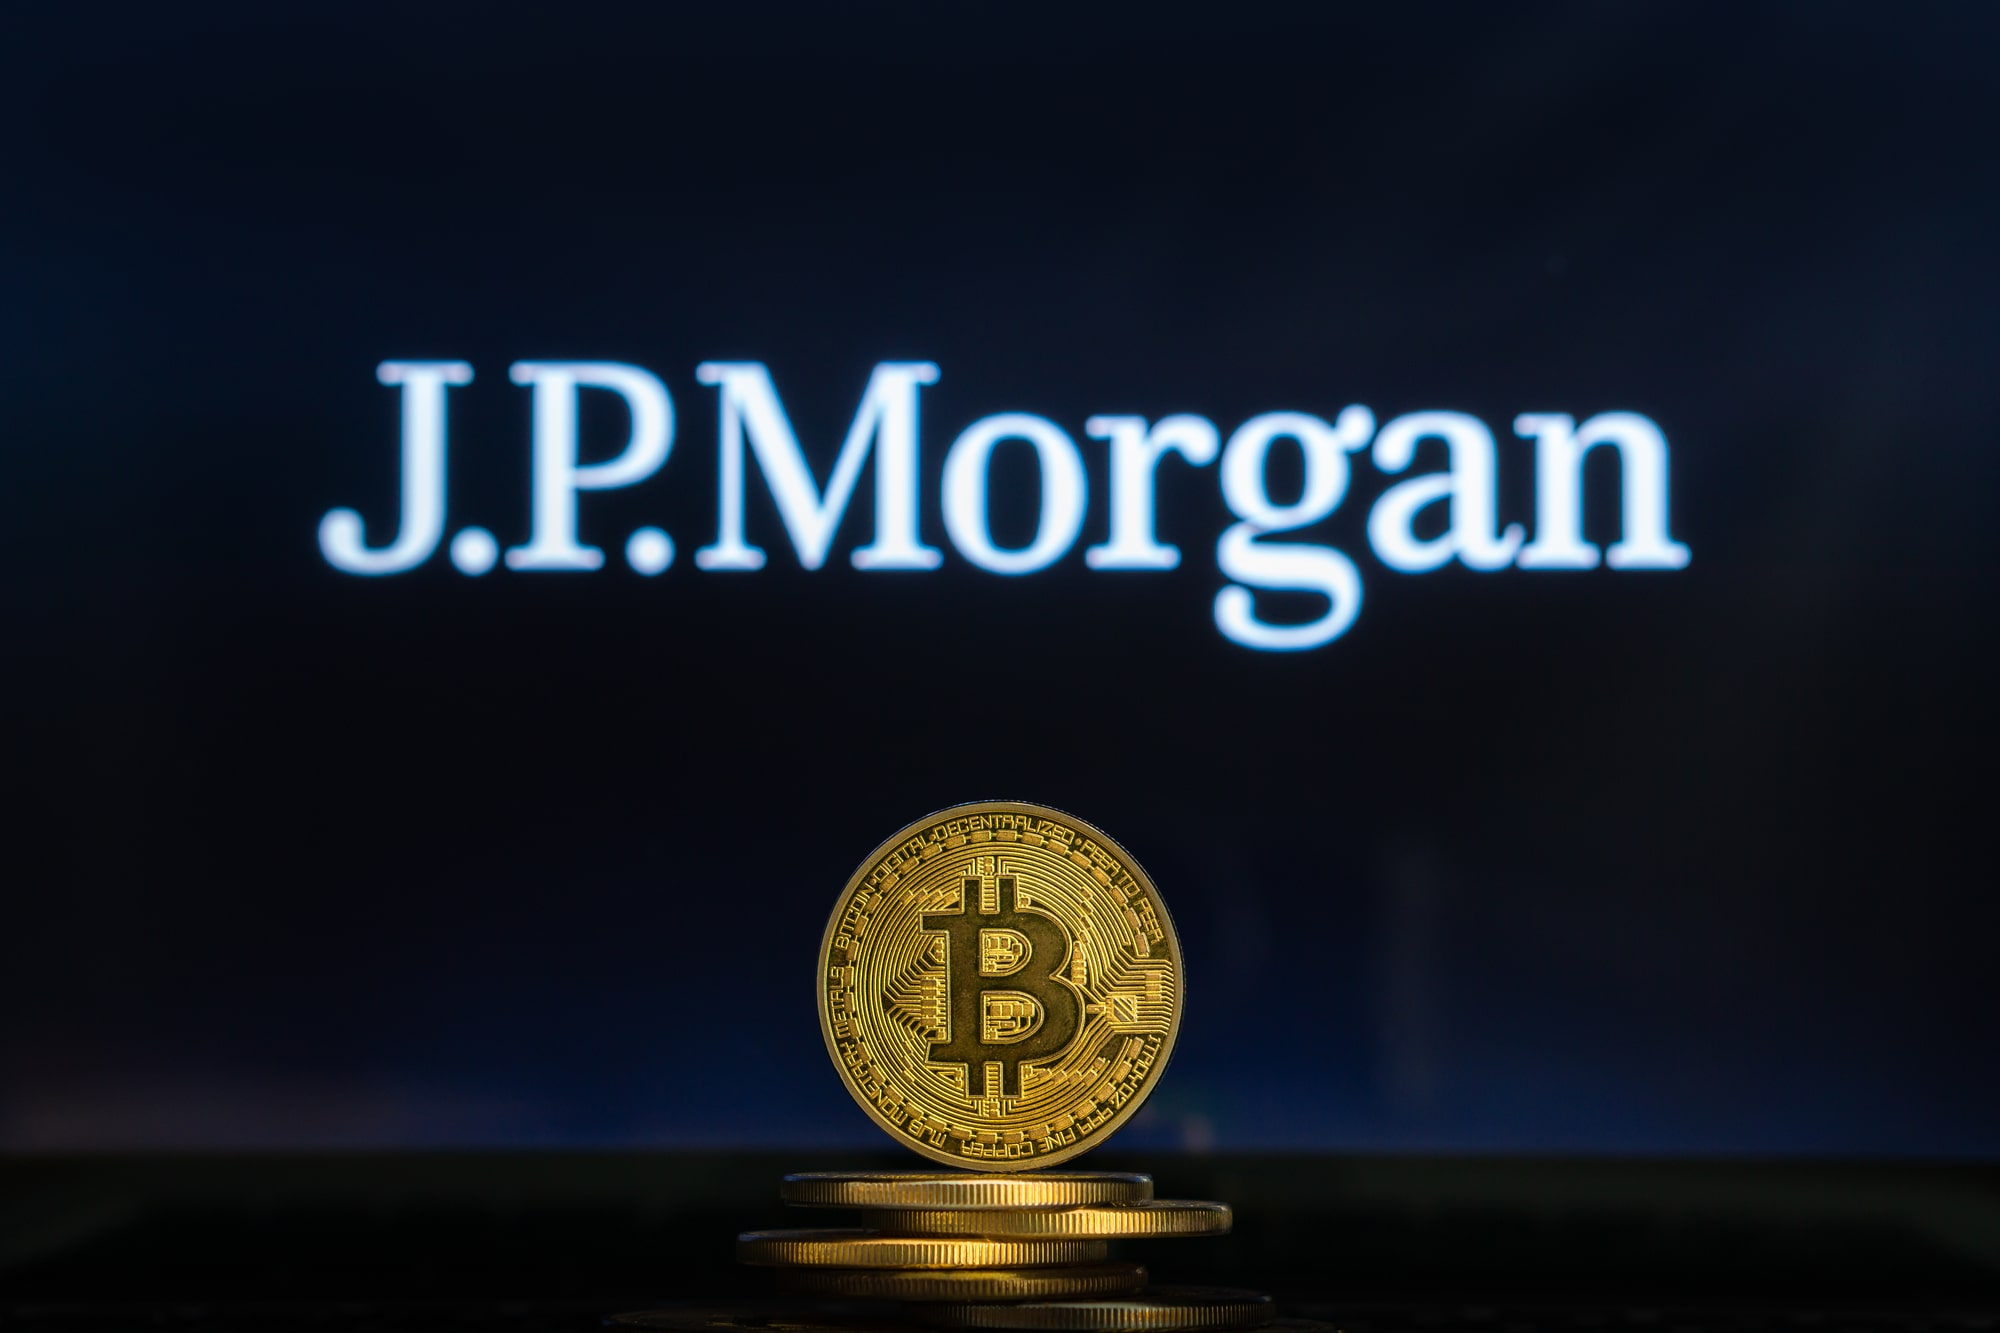 JPMorgan: Institutional investors are switching from gold to Bitcoin